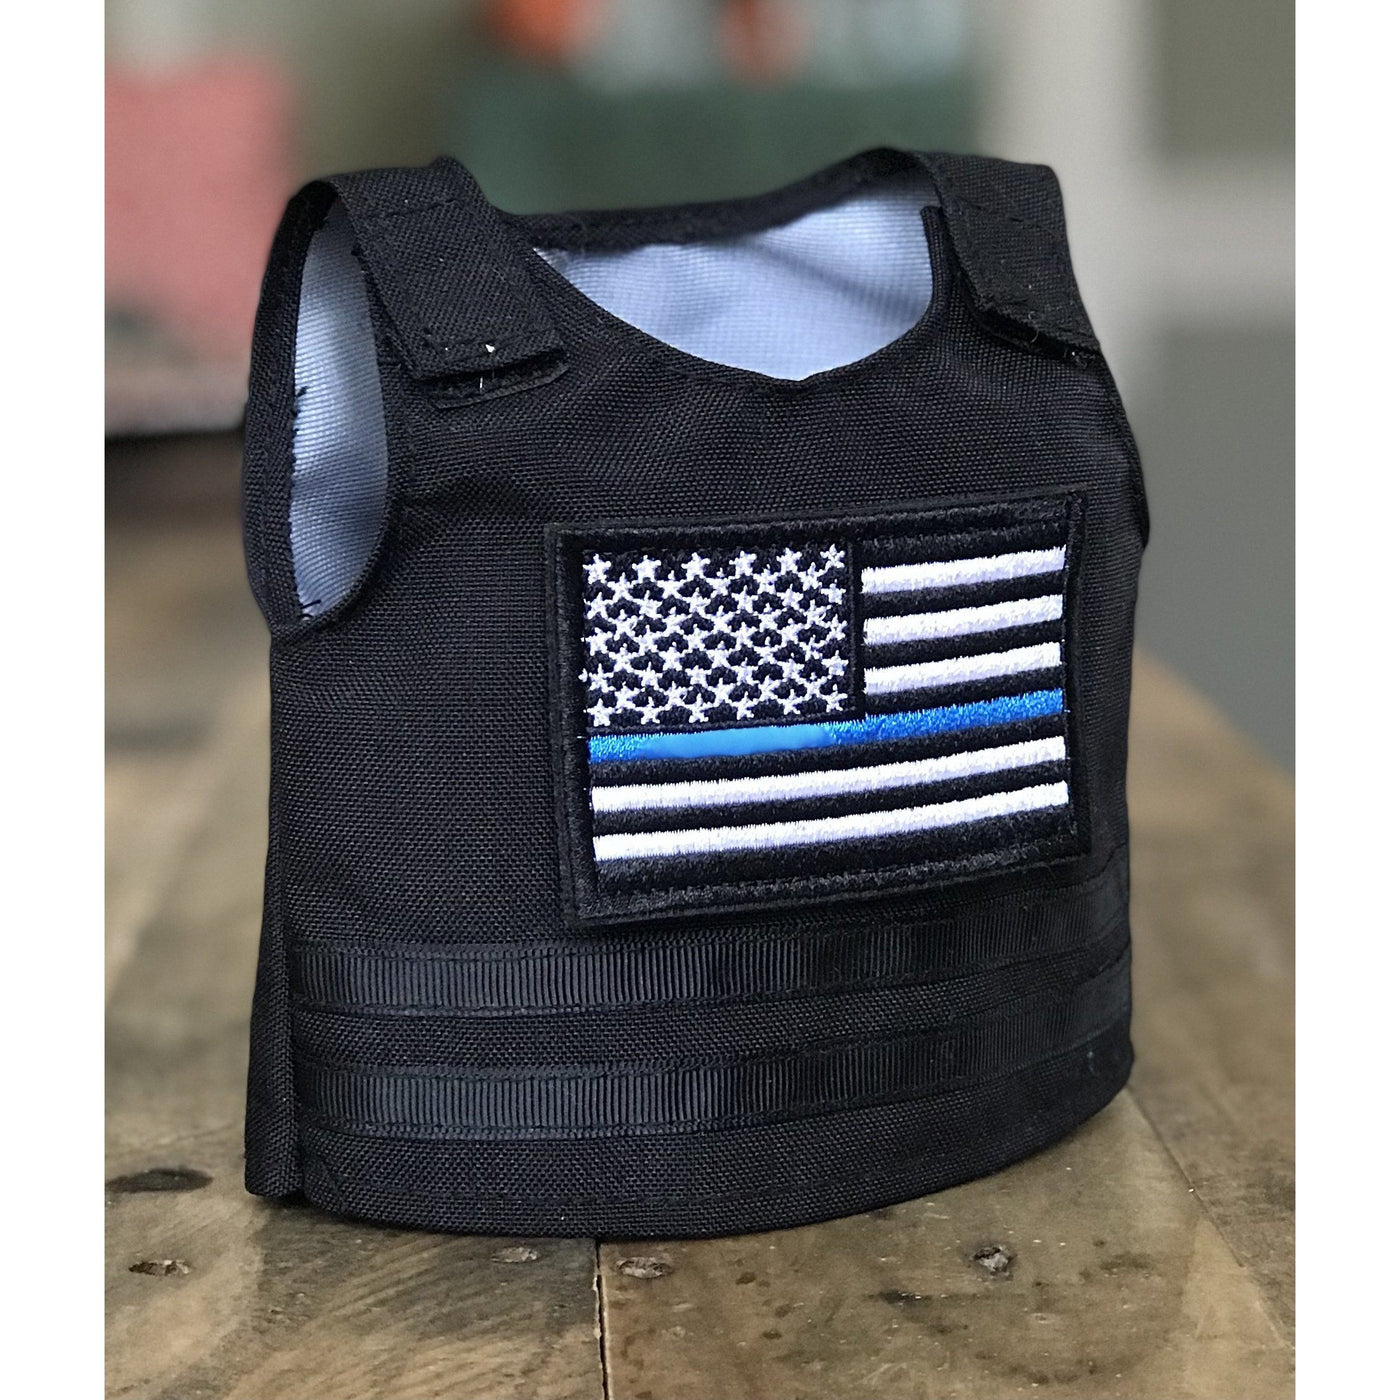  Police Patch For Vest